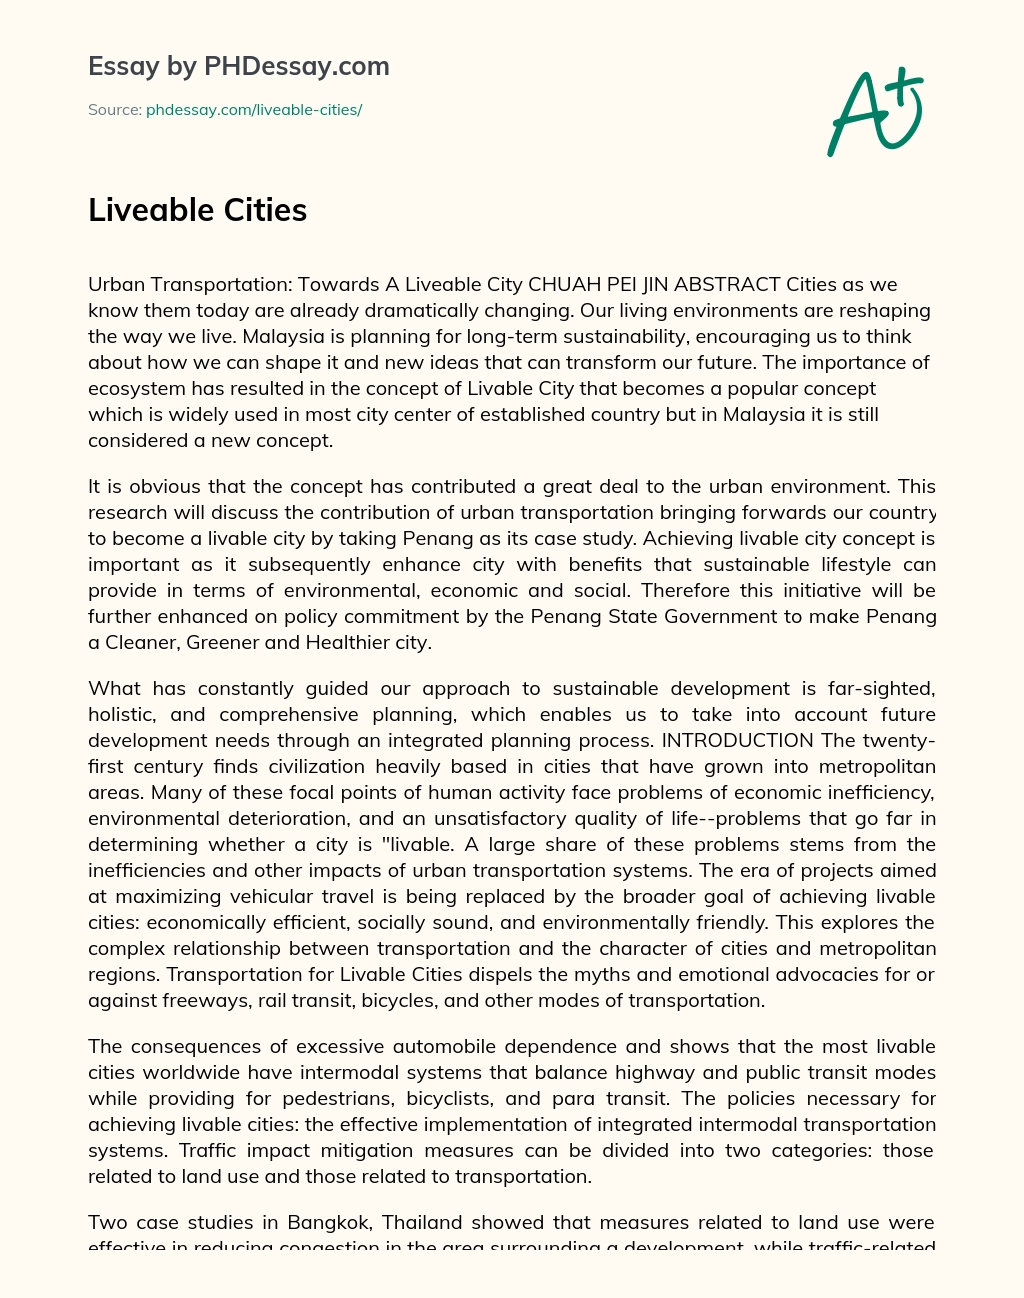 Penang as Liveable City: Urban Transport Issues essay